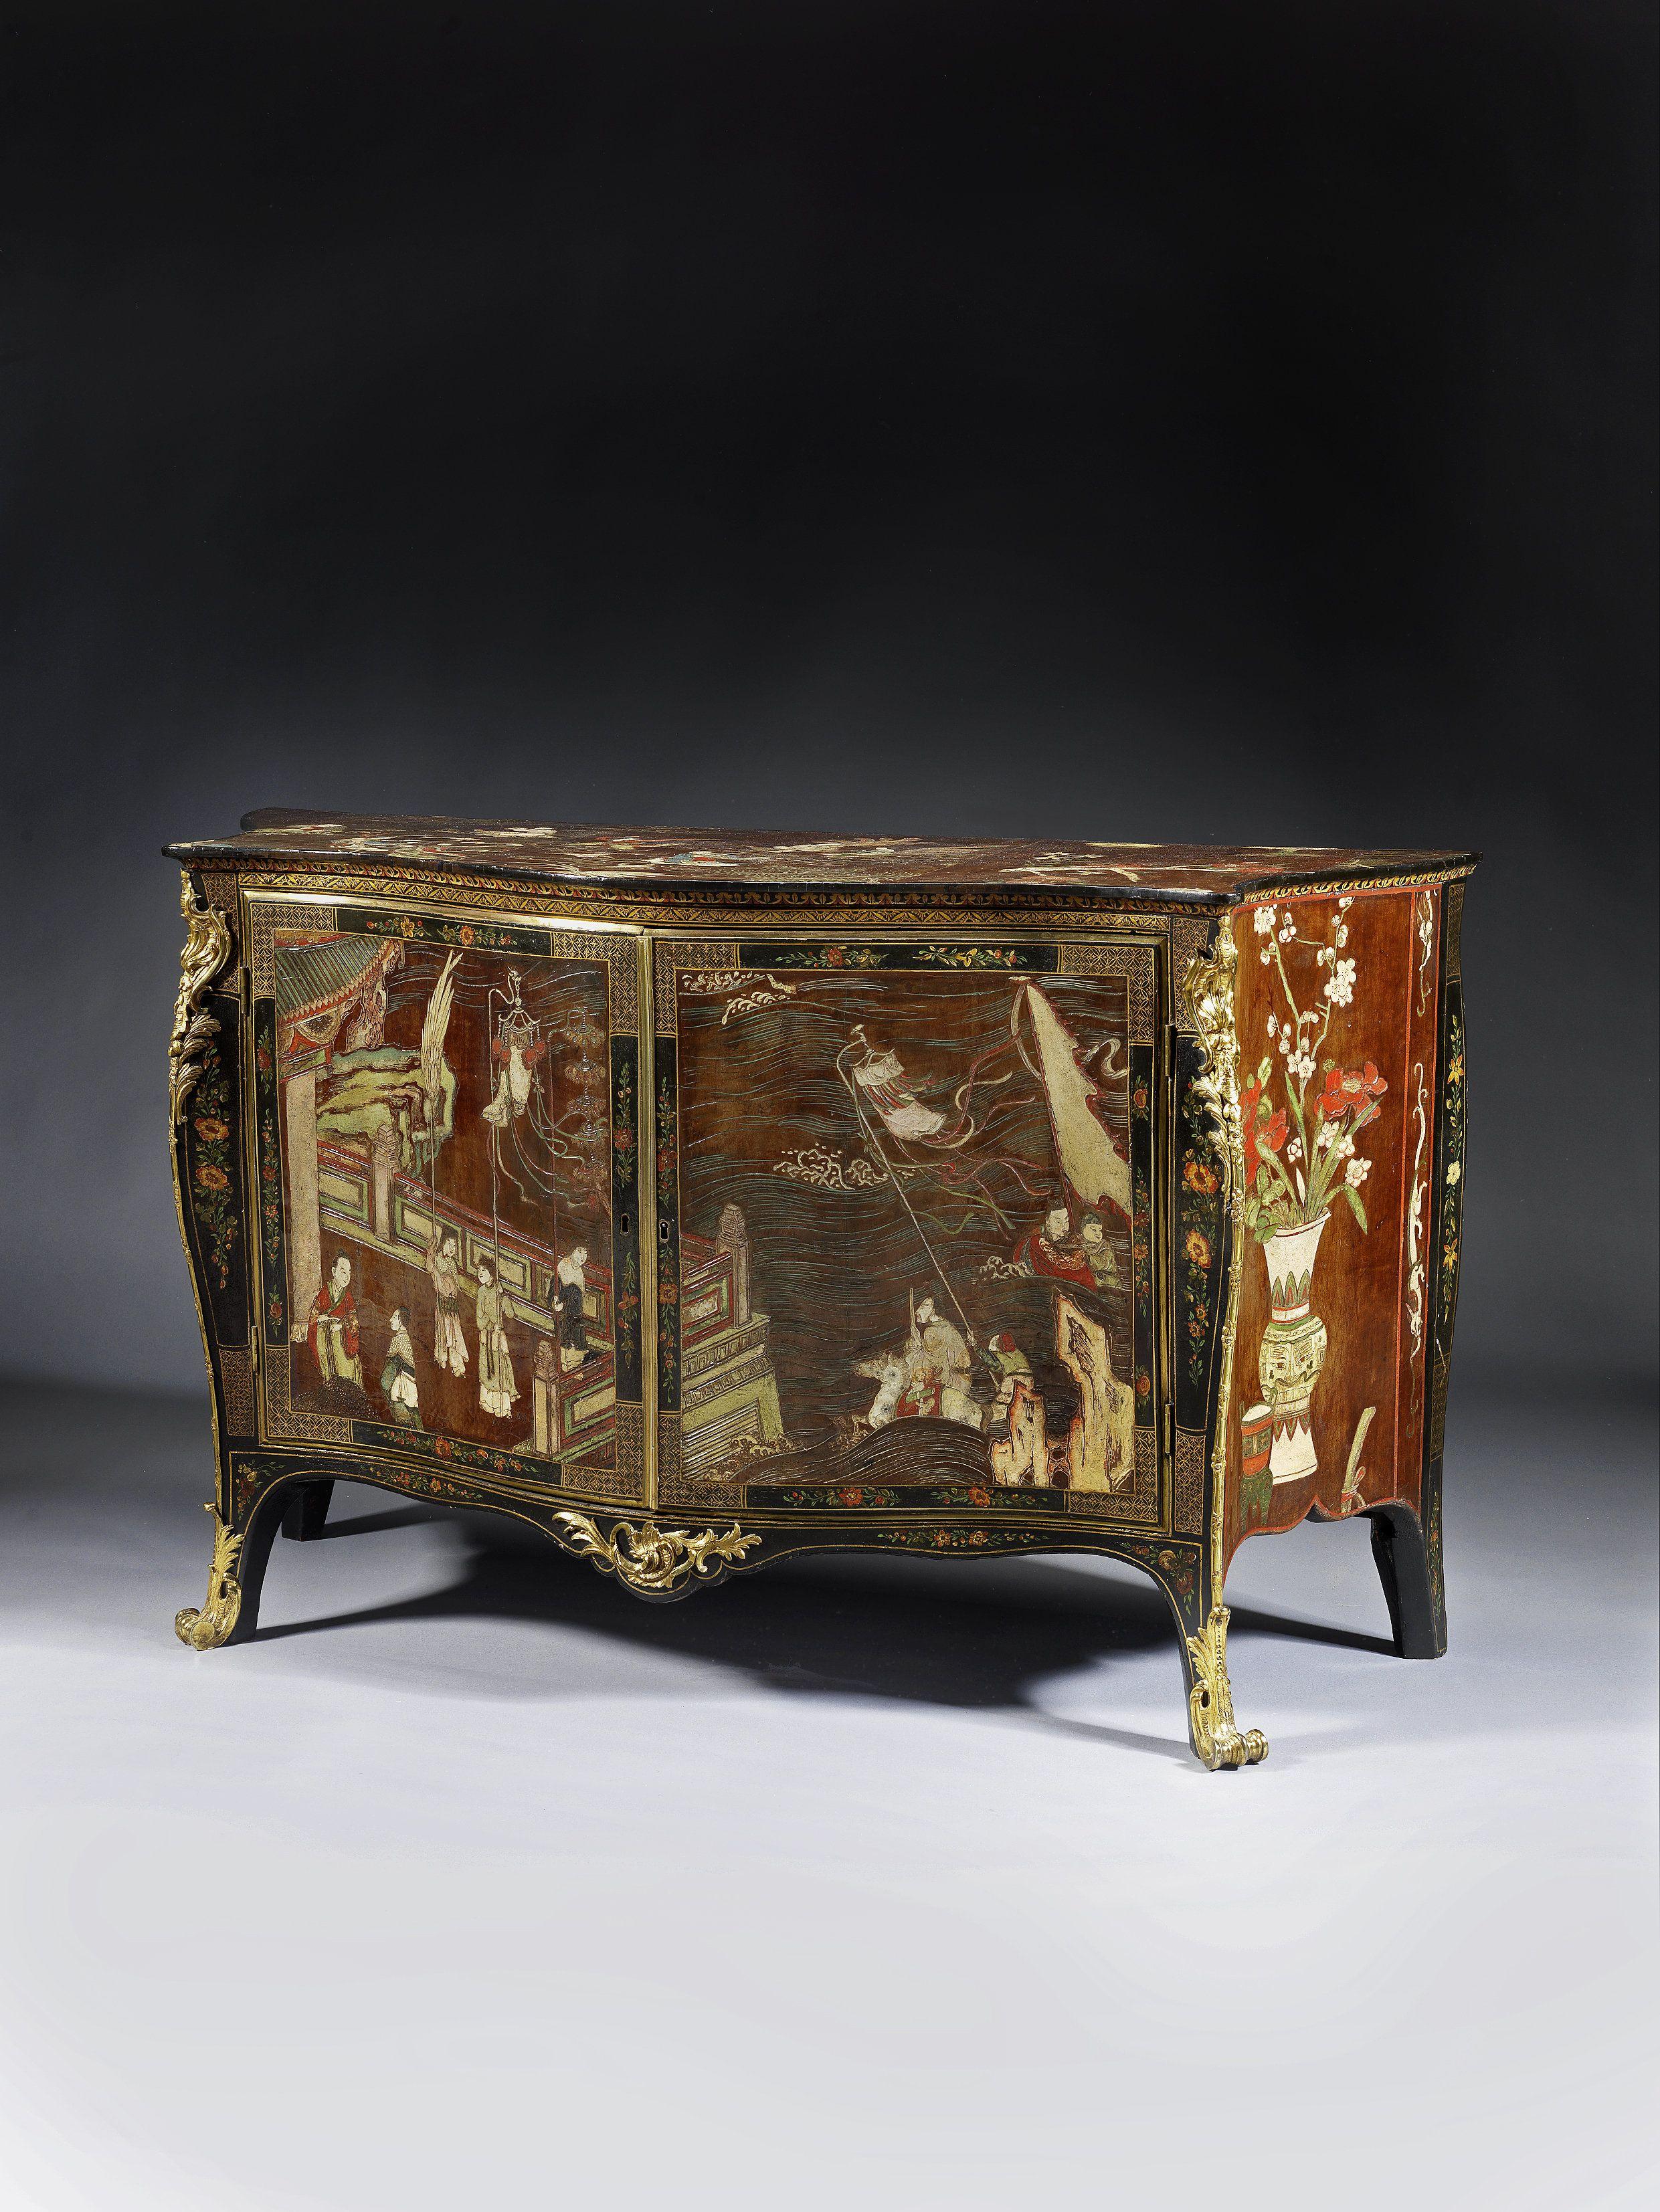 Chinoiserie George III Coromandel Lacquer, Gilt Brass-Mounted Serpentine Commode For Sale